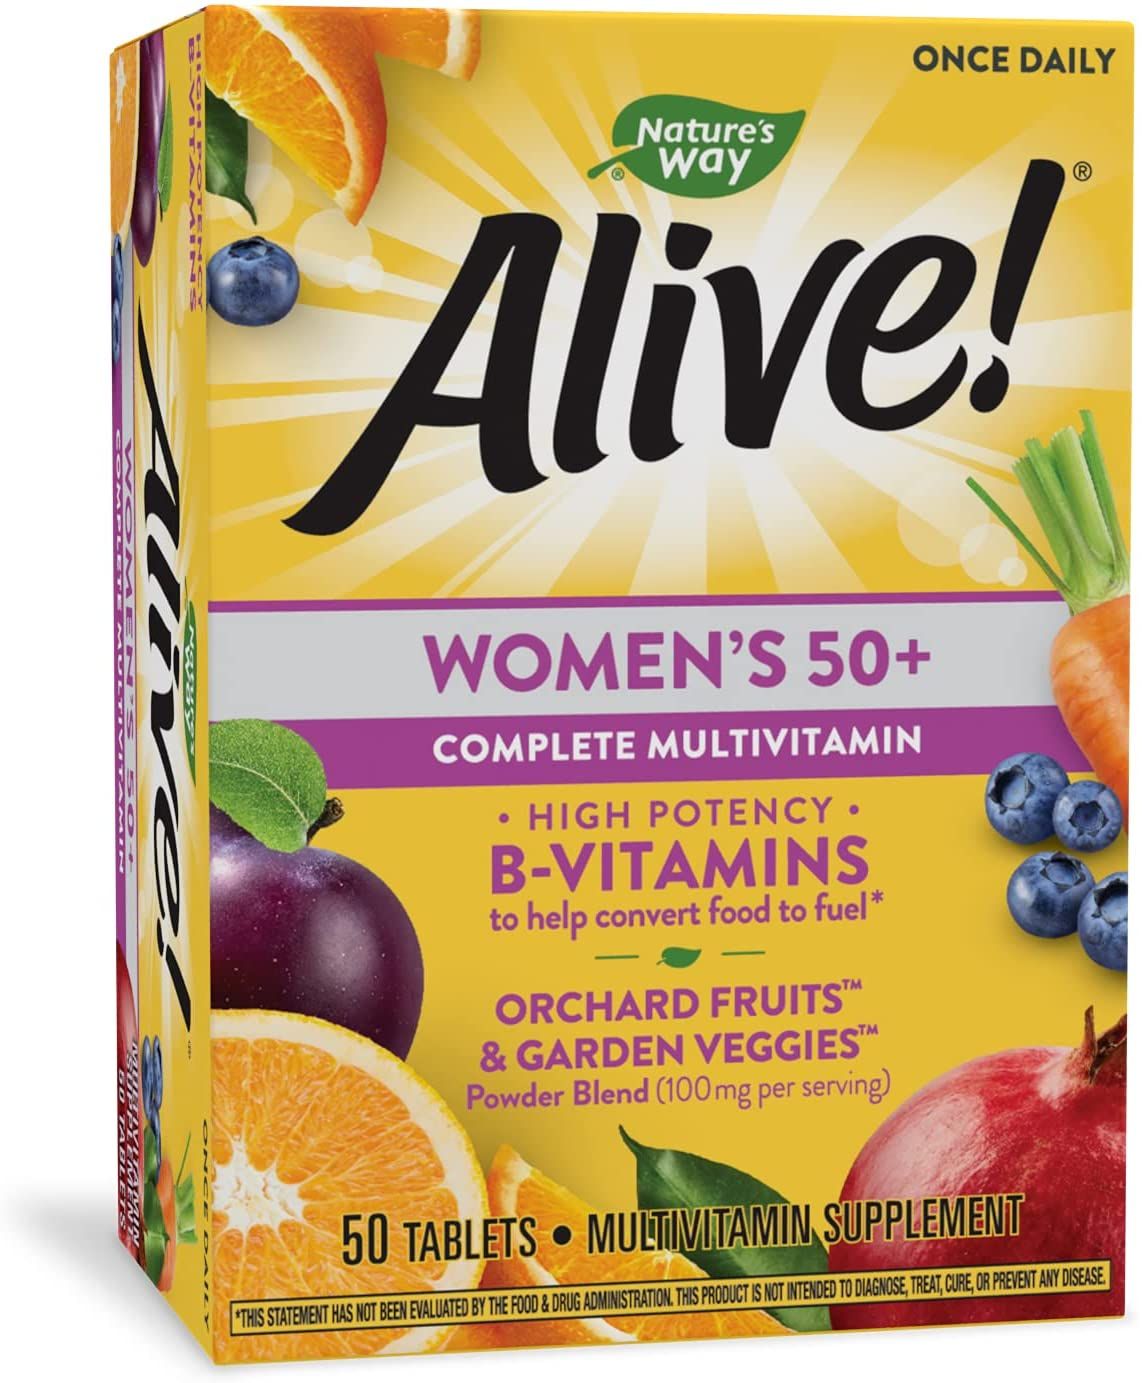 Nature's Way Alive! Women's 50+ Complete Multivitamin Tablets - 50 ct